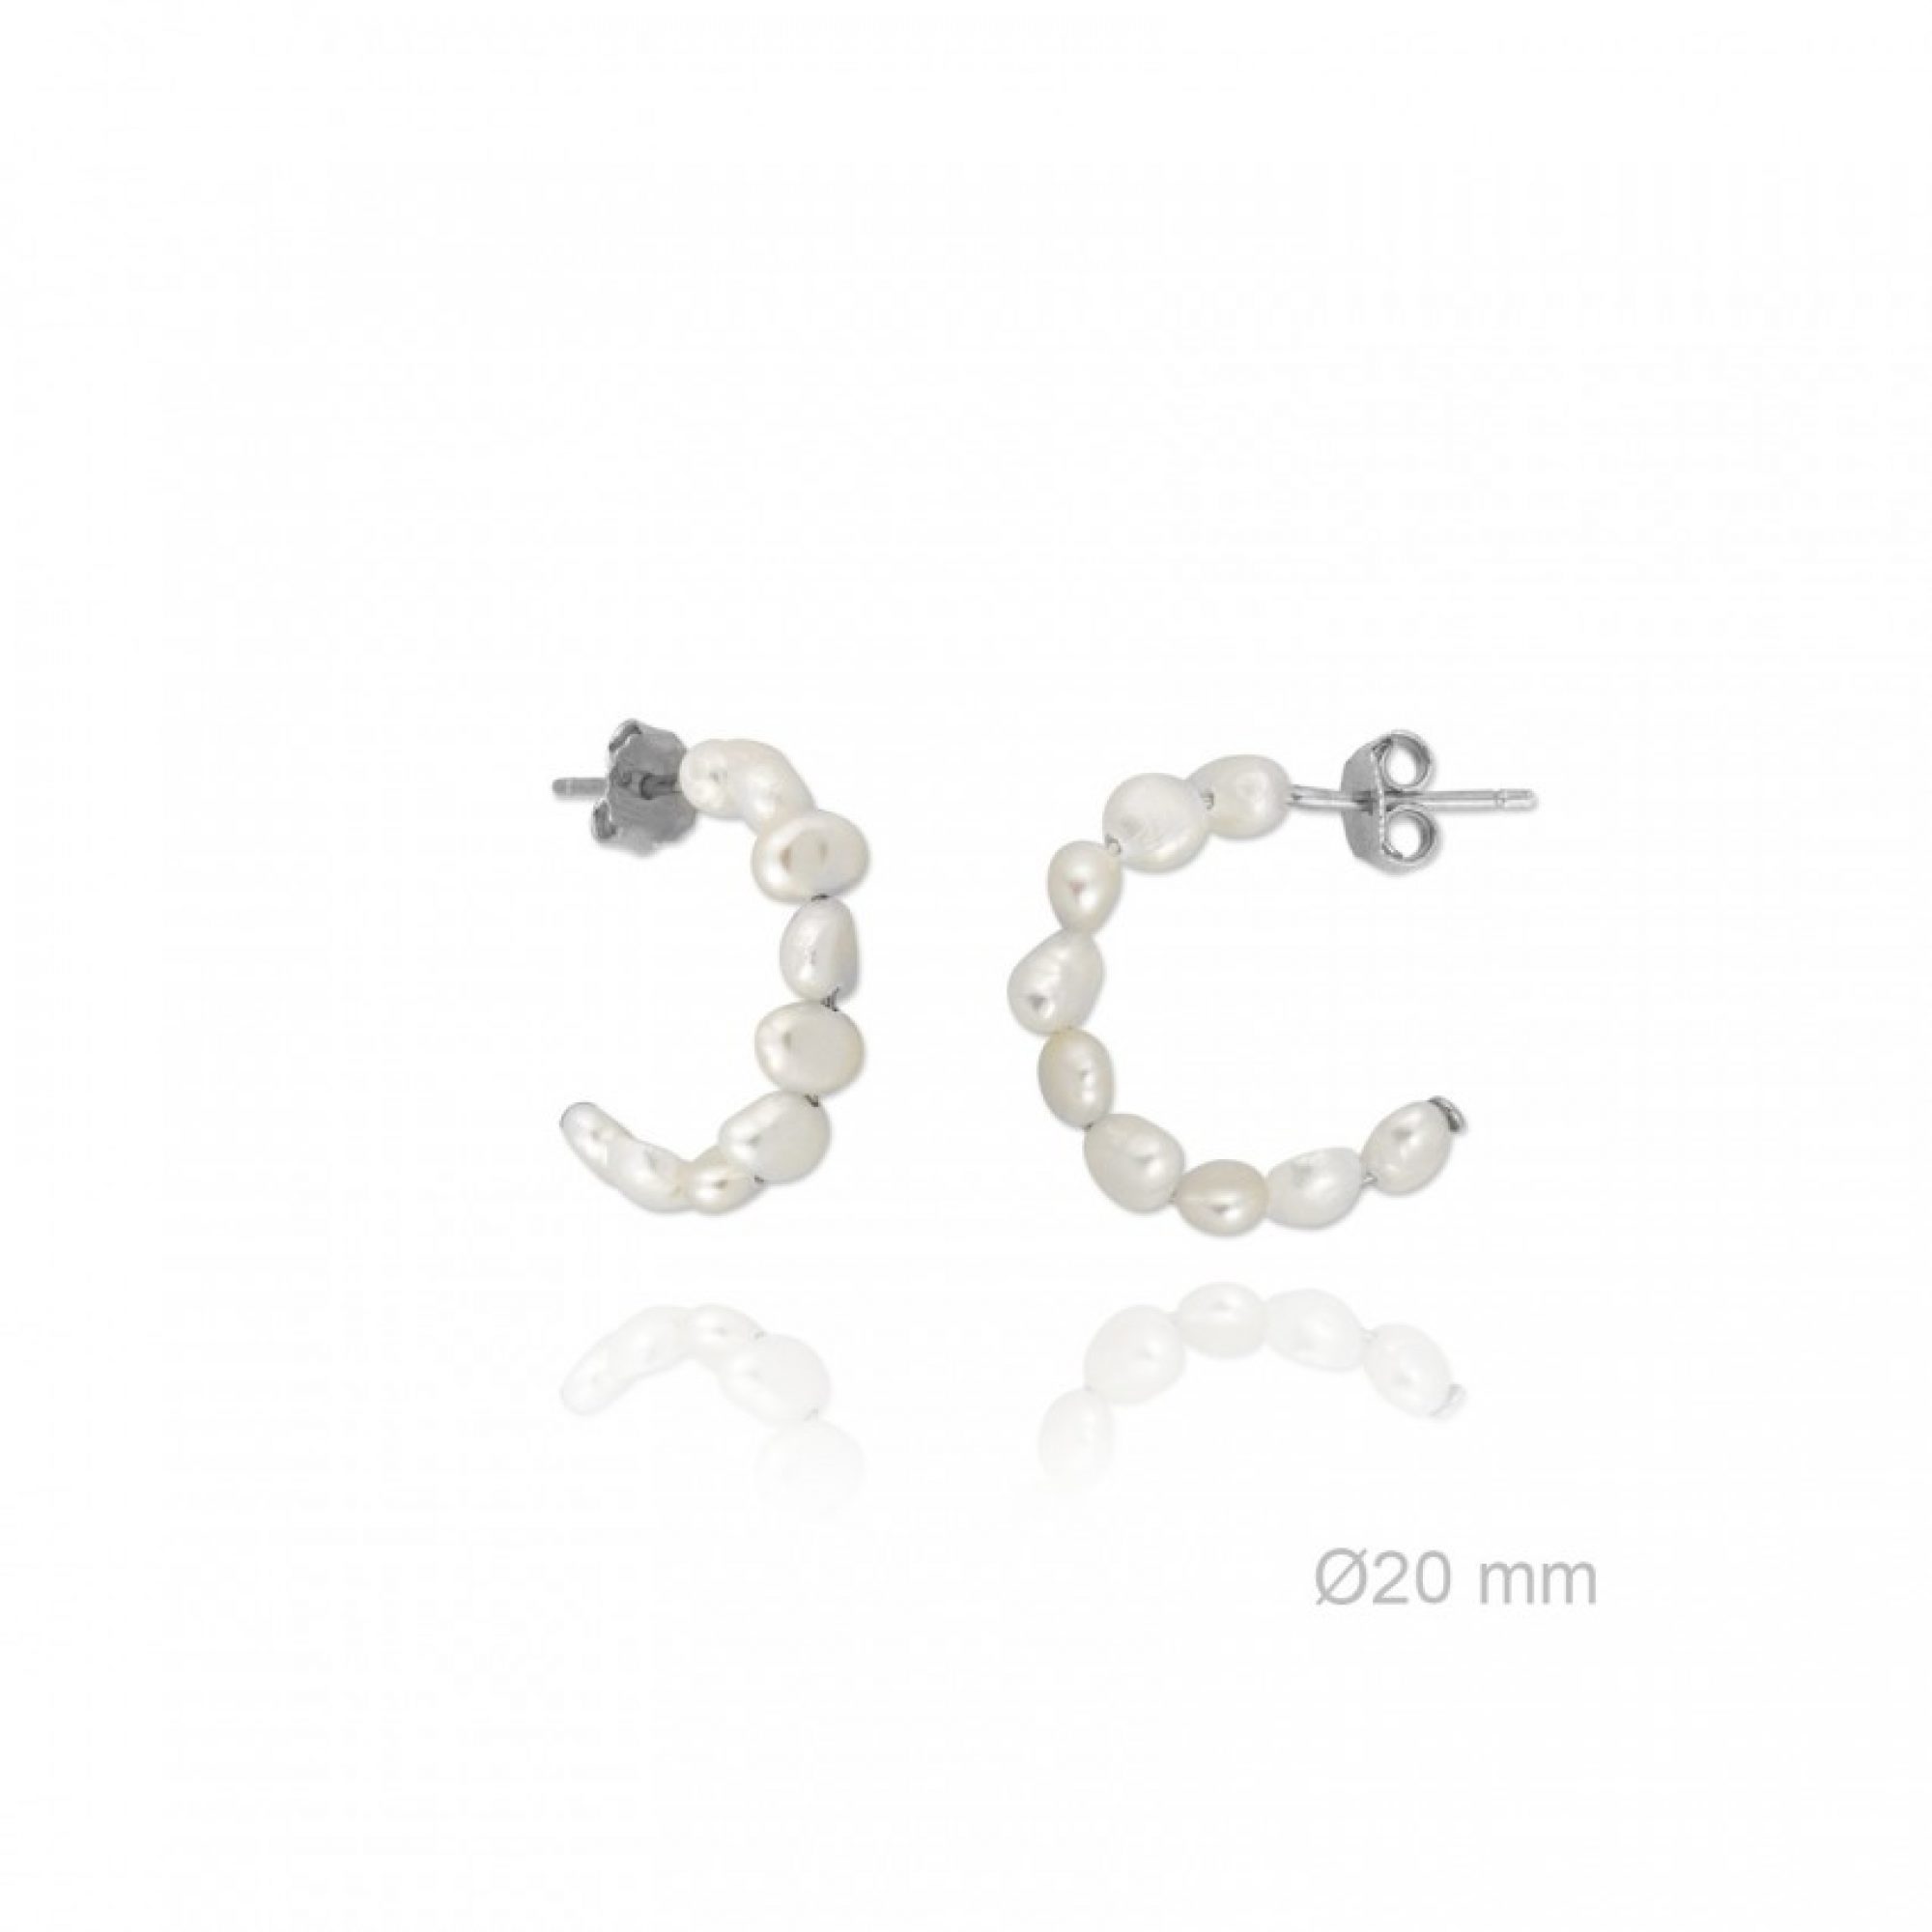 Silver earrings with real pearls